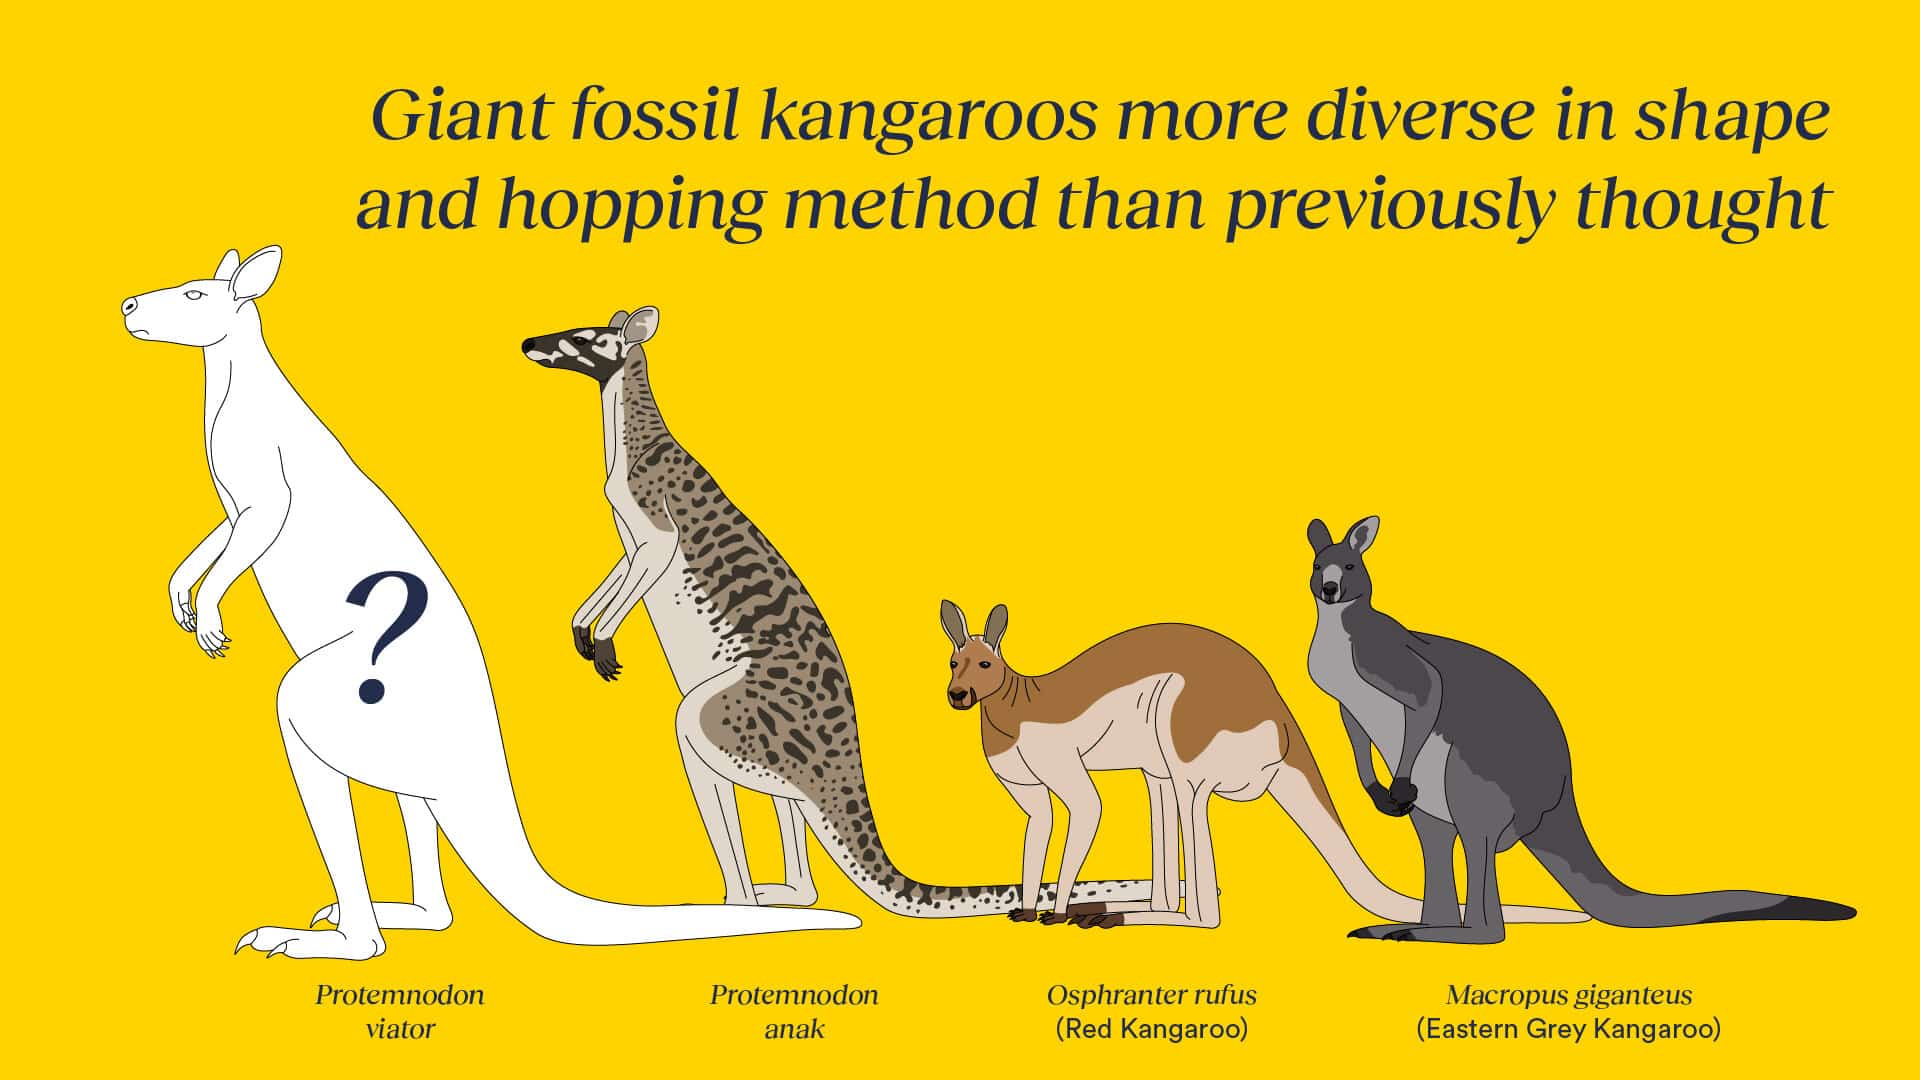 This is what giant kangaroos looked like 40,000 years ago

